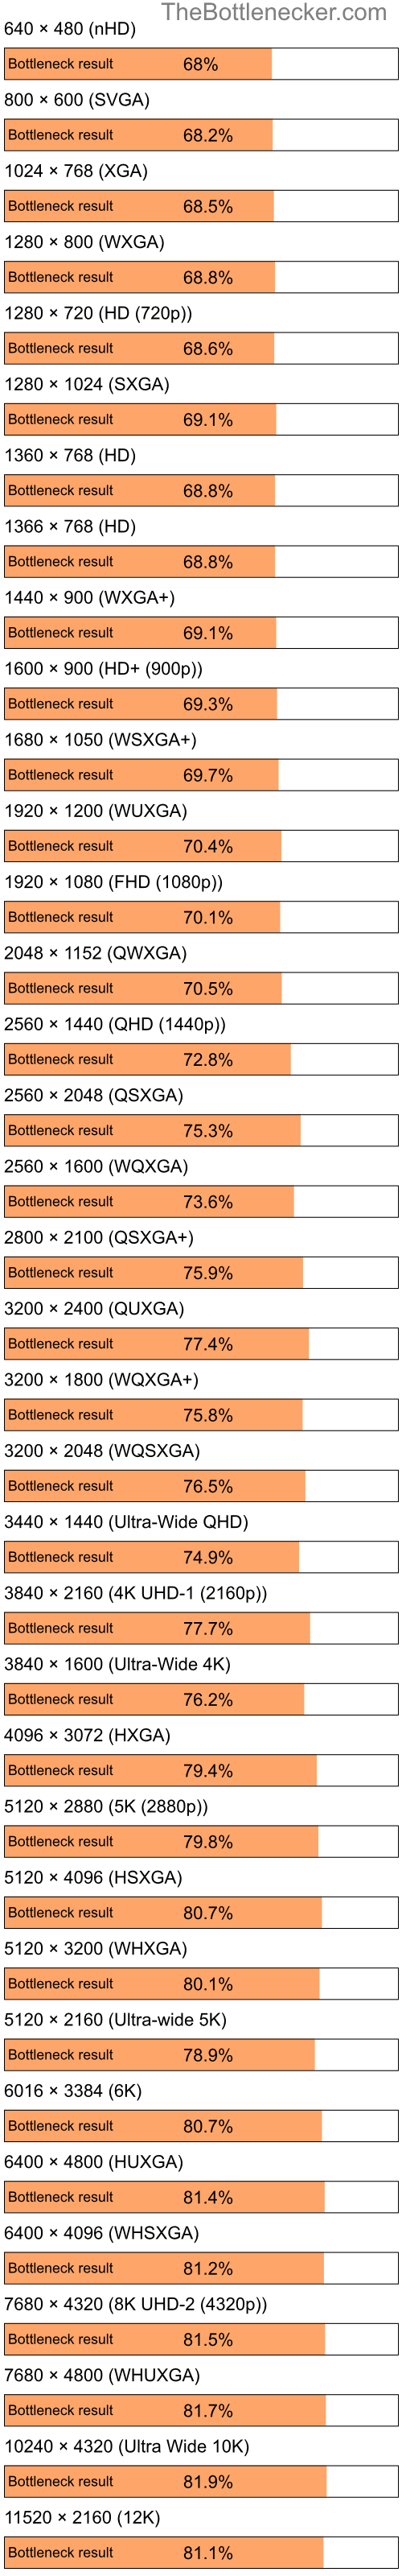 Bottleneck results by resolution for Intel Celeron M and AMD Radeon HD 4270 in Graphic Card Intense Tasks